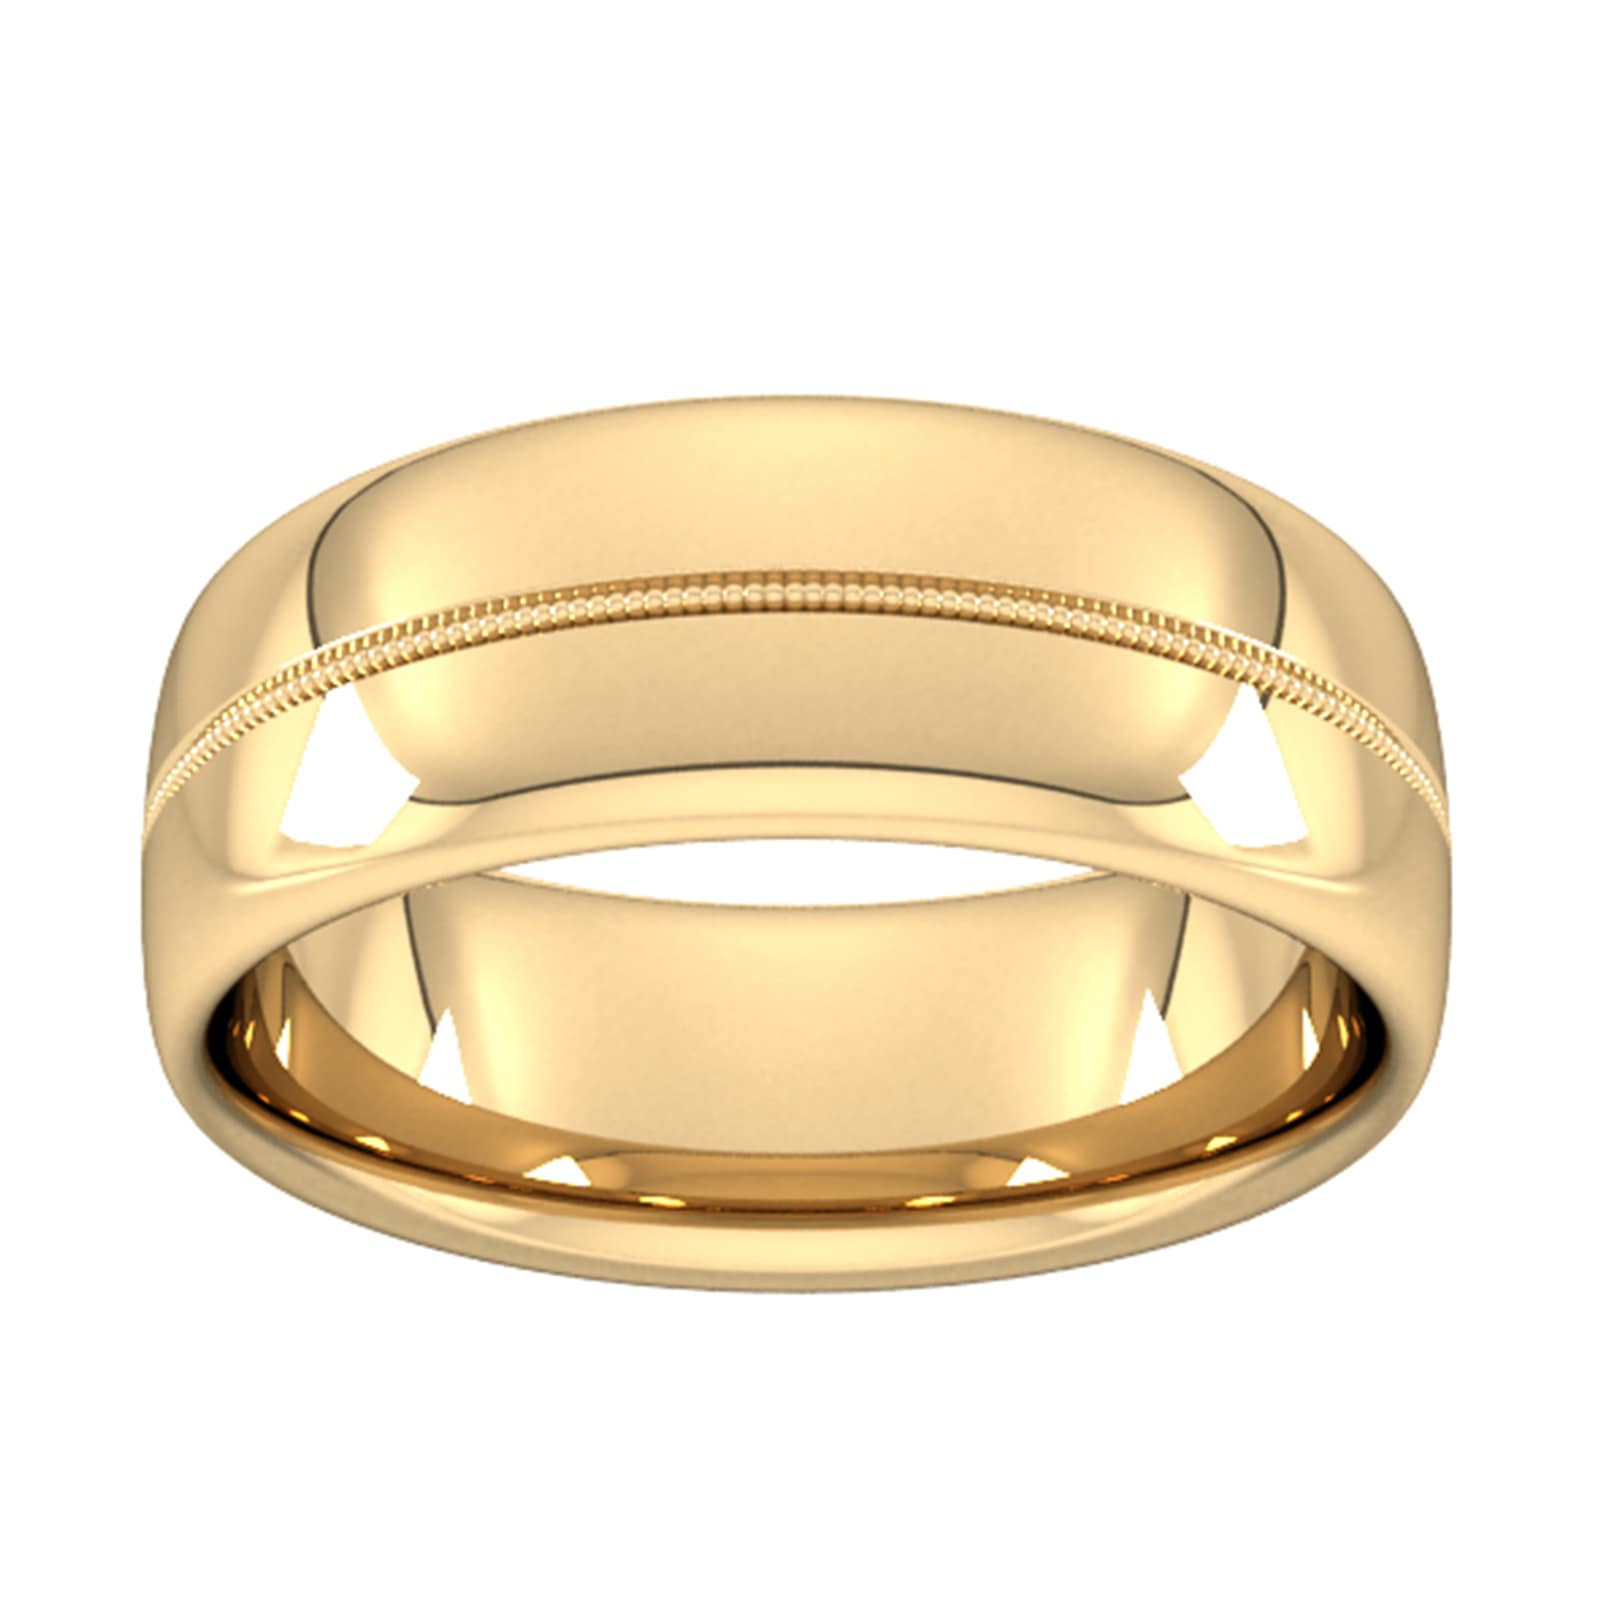 8mm Slight Court Extra Heavy Milgrain Centre Wedding Ring In 9 Carat Yellow Gold - Ring Size O